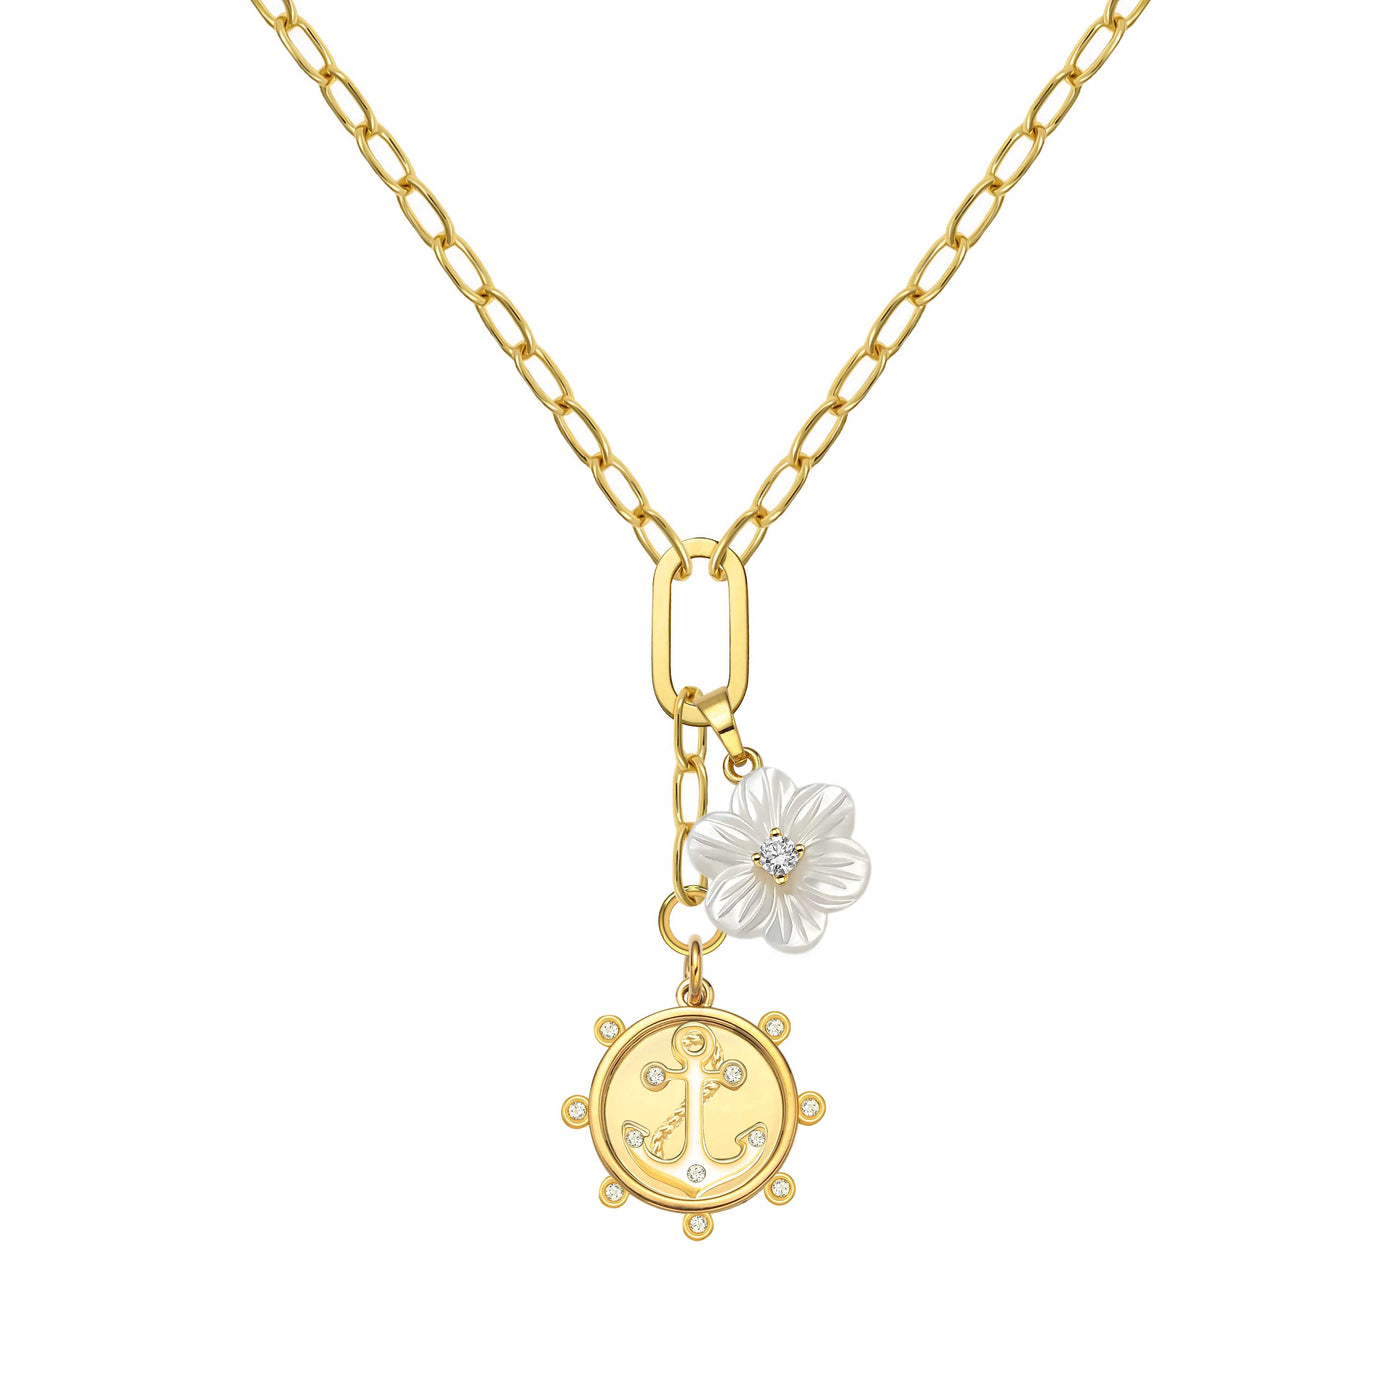 Anchor CZ and Gold Charm Pendant